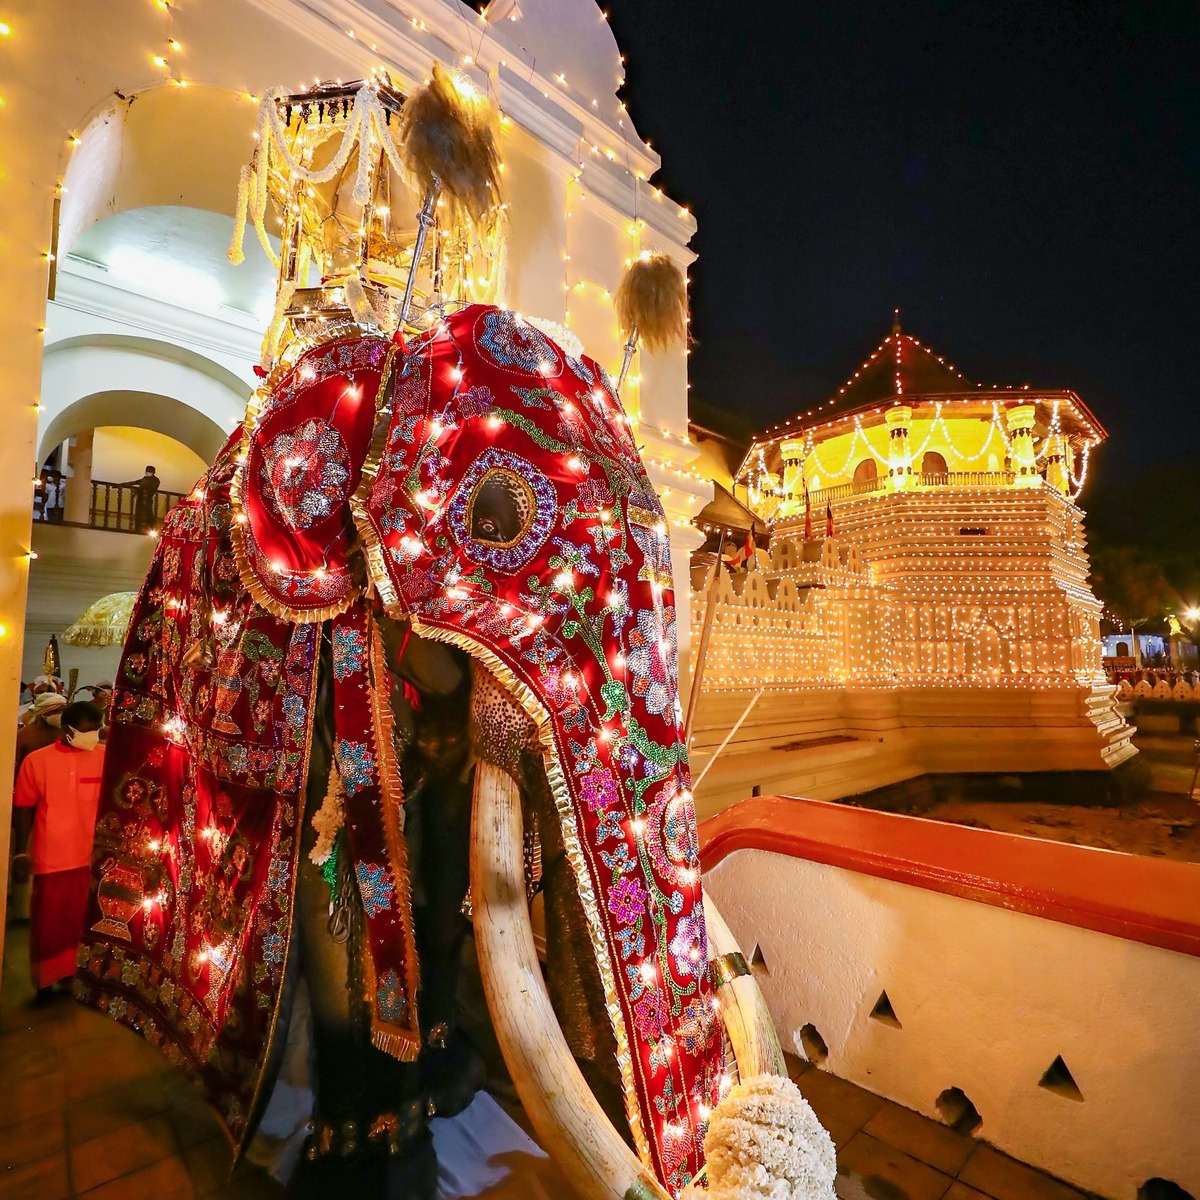 An image capturing the grandeur of the Kandy Perahera festival in Sri Lanka, featuring an elephant adorned with traditional finery in honor of the Dalada Karaduwa, the Temple of the Tooth Relic.